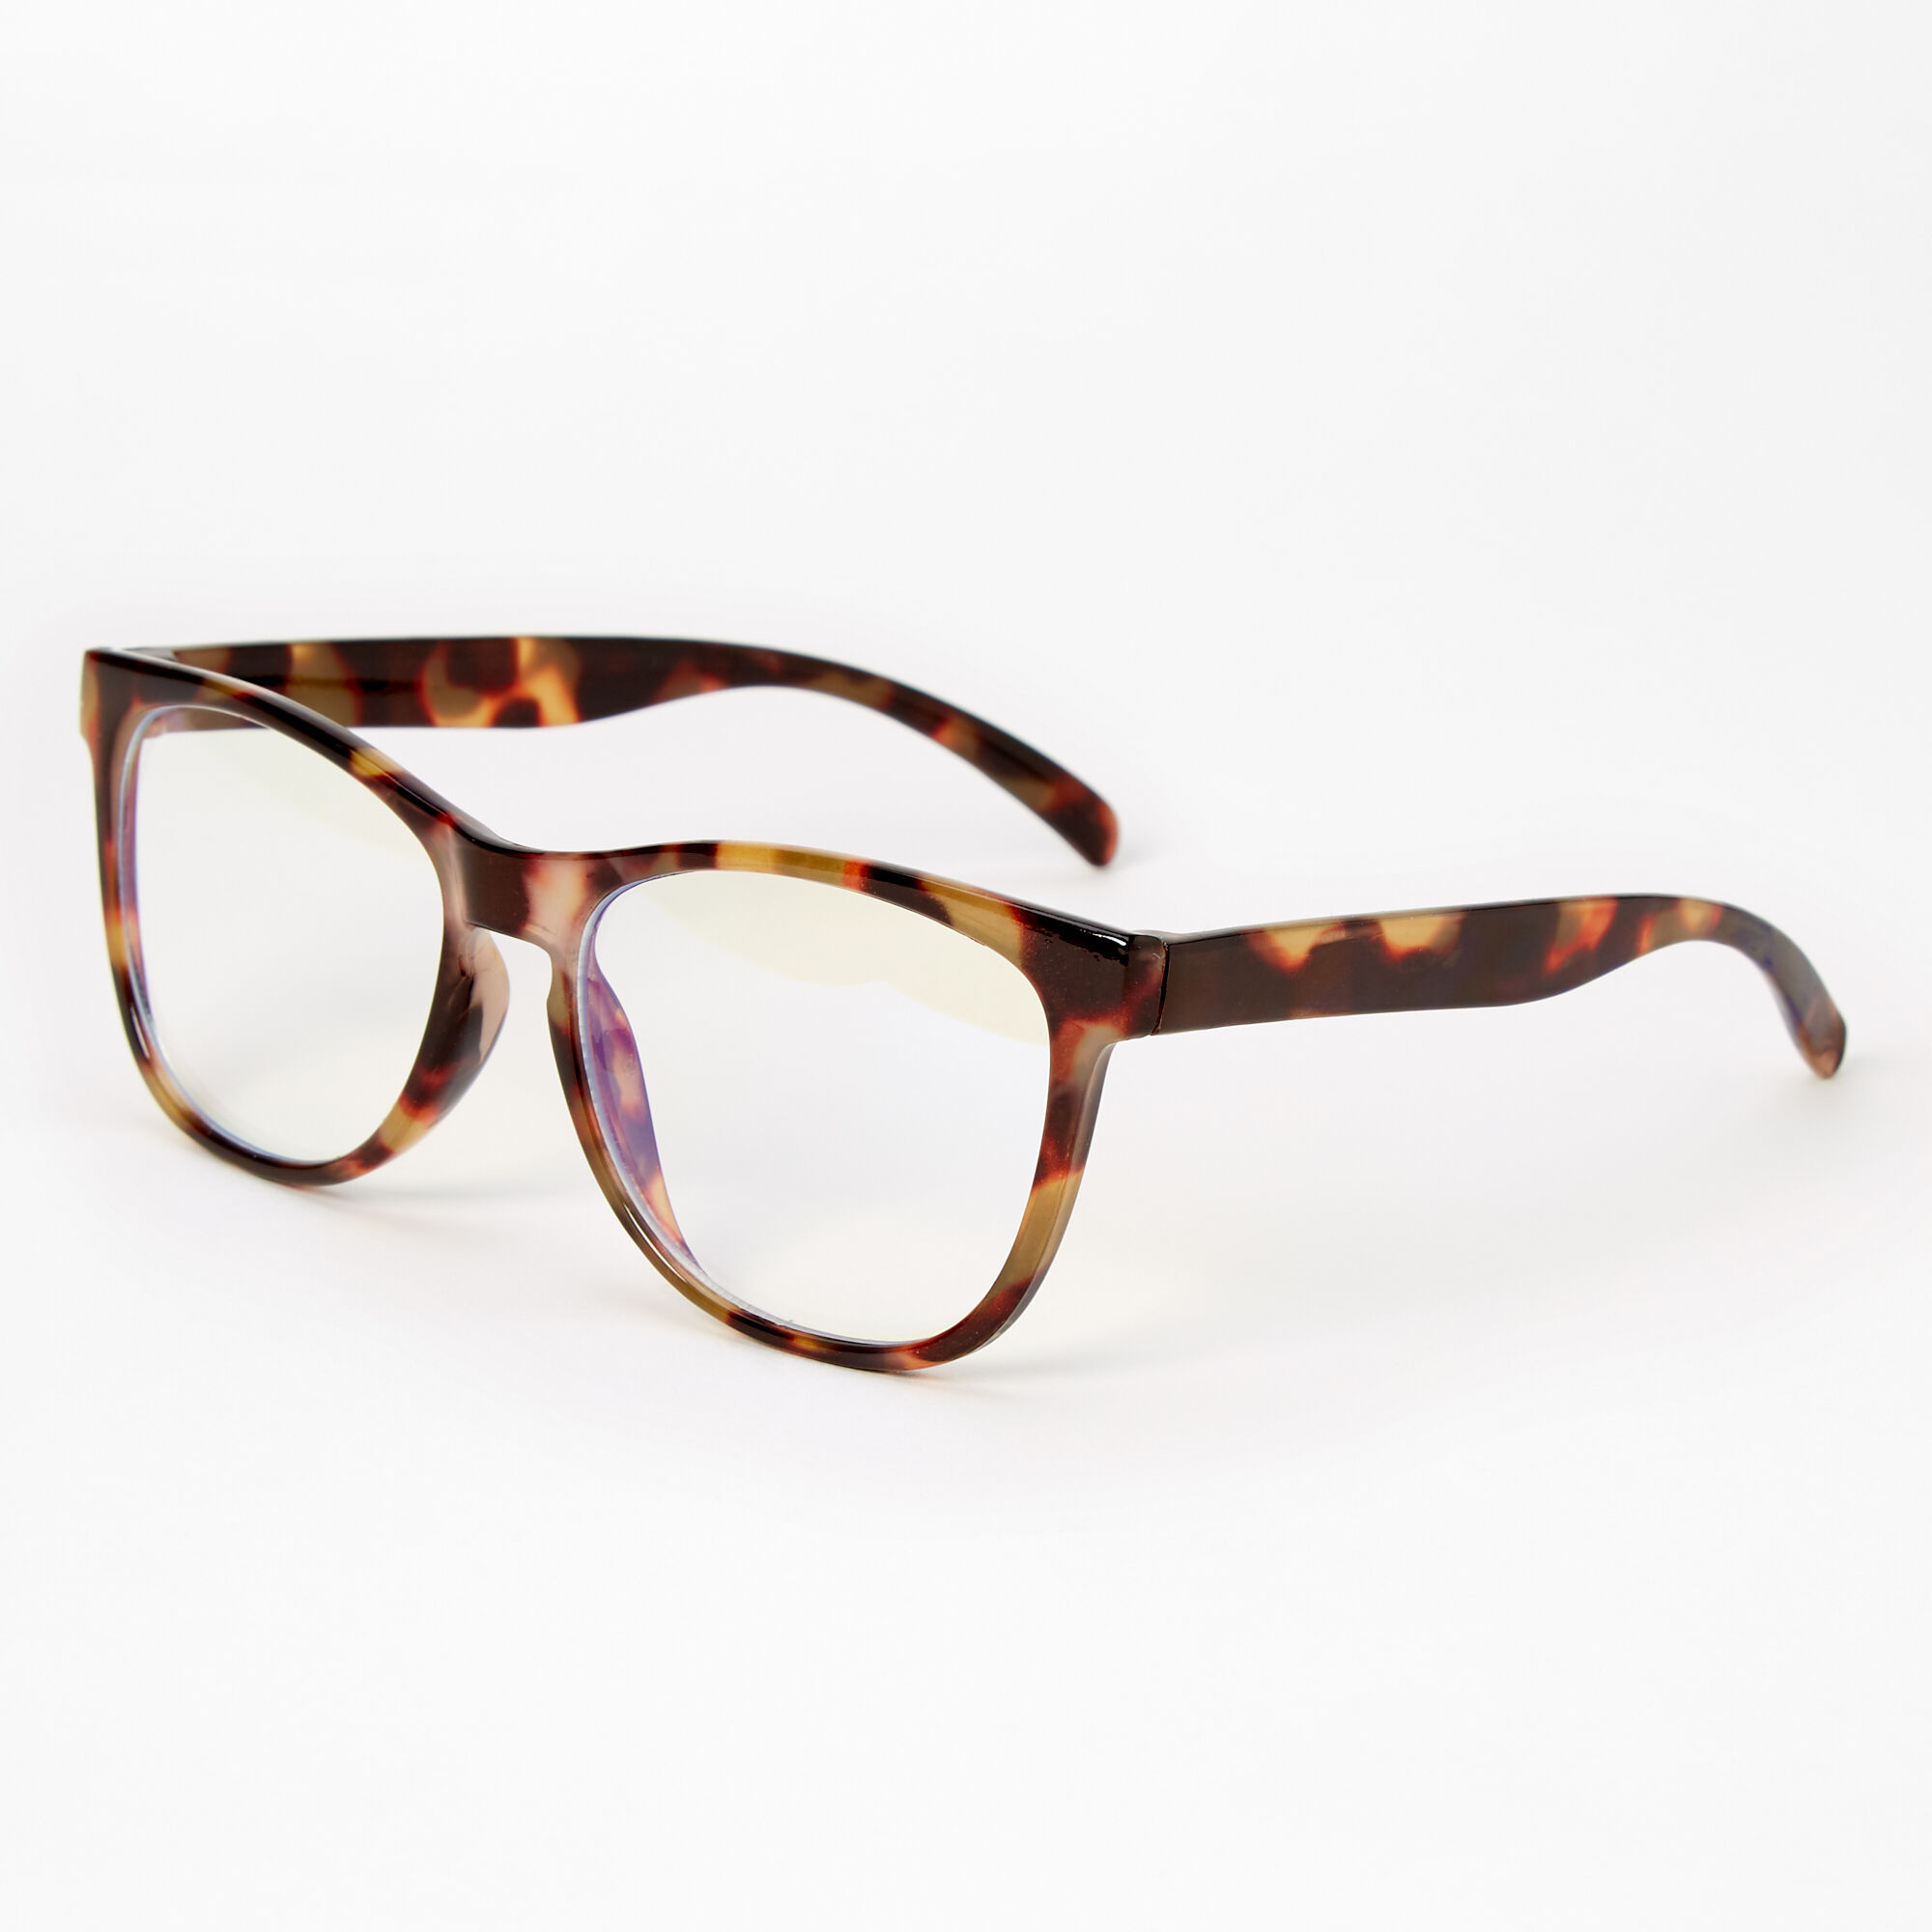 View Claires Club Tortoiseshell Rectangle Clear Lens Frames information